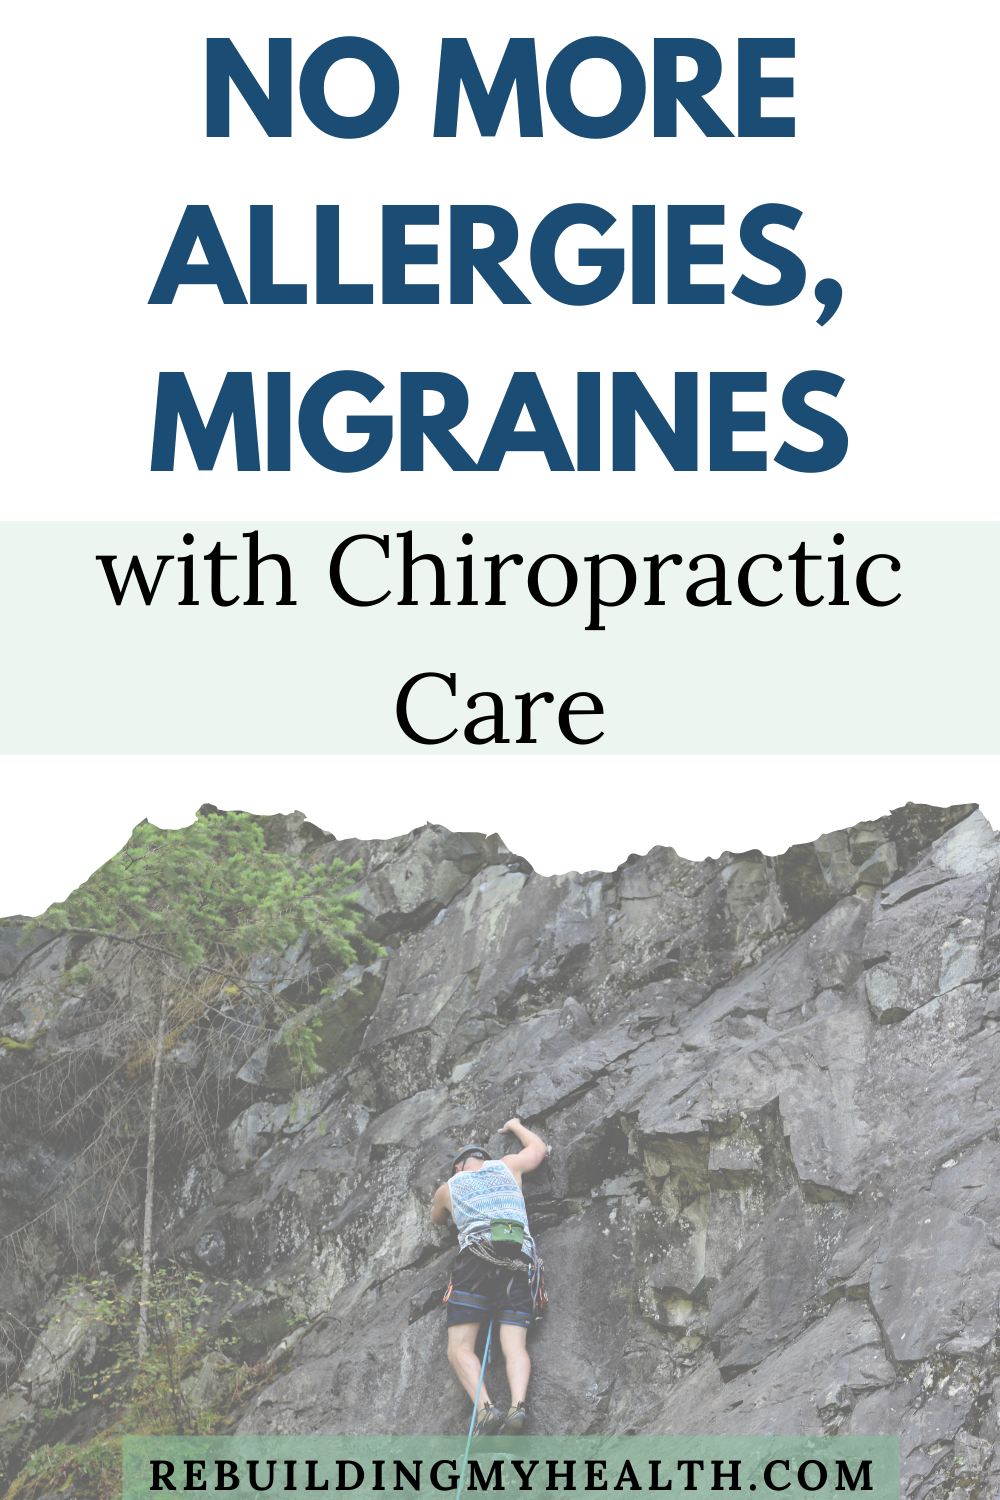 Learn about chiropractic for migraines and allergies. A Colorado man successfully halted his allergies and migraines with chiropractic focused on the upper cervical spine.